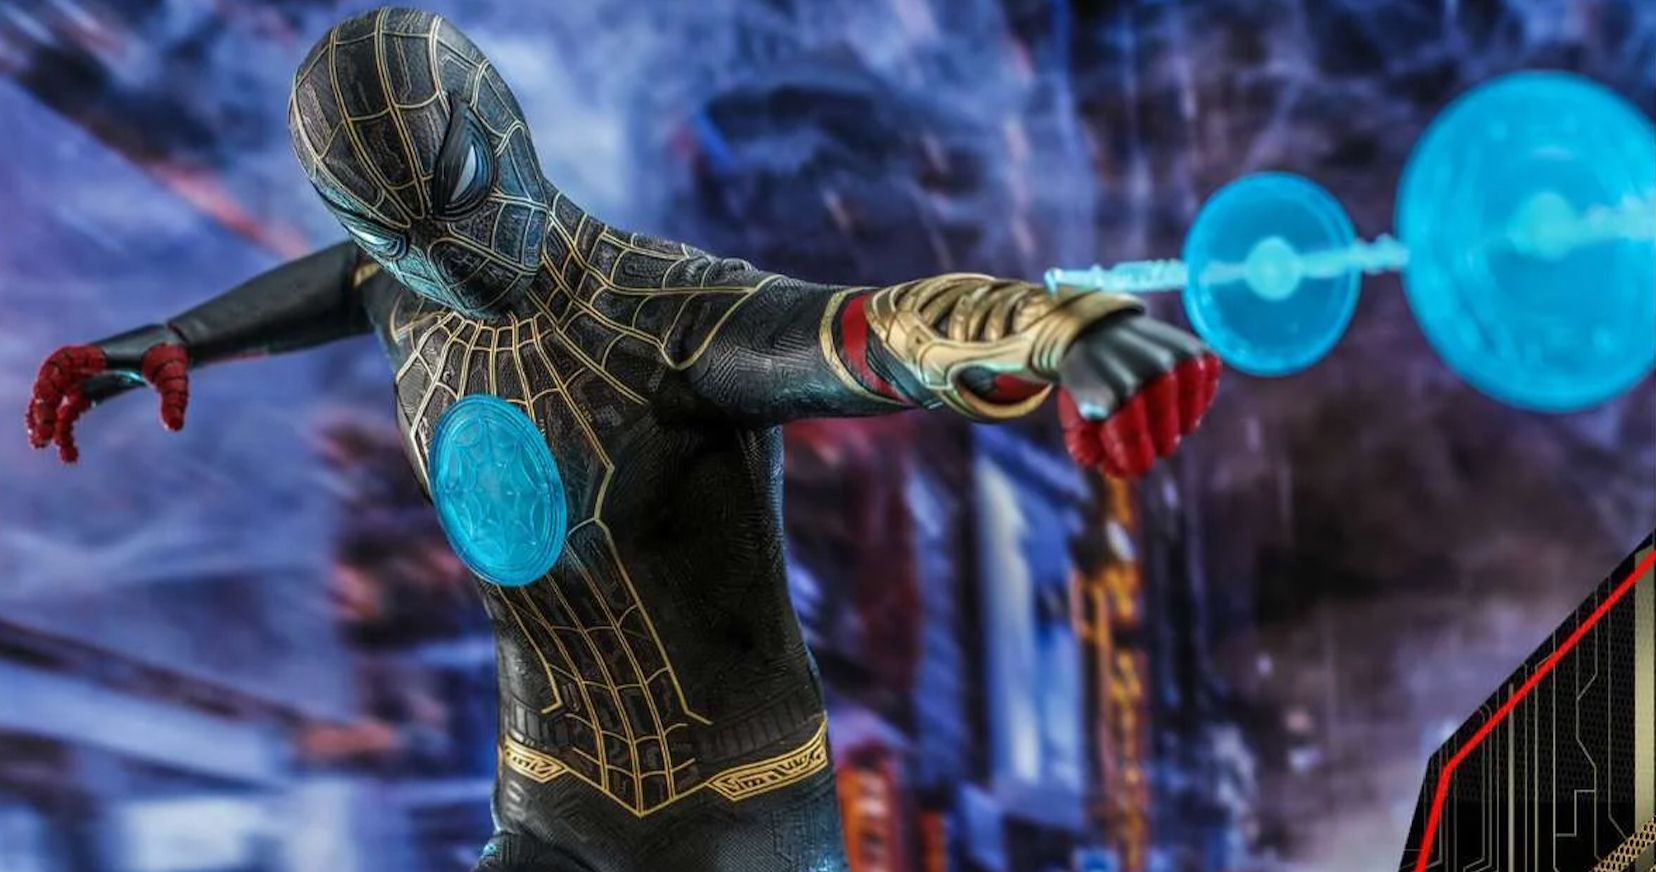 Spider-Man: No Way Home Hot Toys Figure Brings a Better Look at New Black &amp; Gold Suit